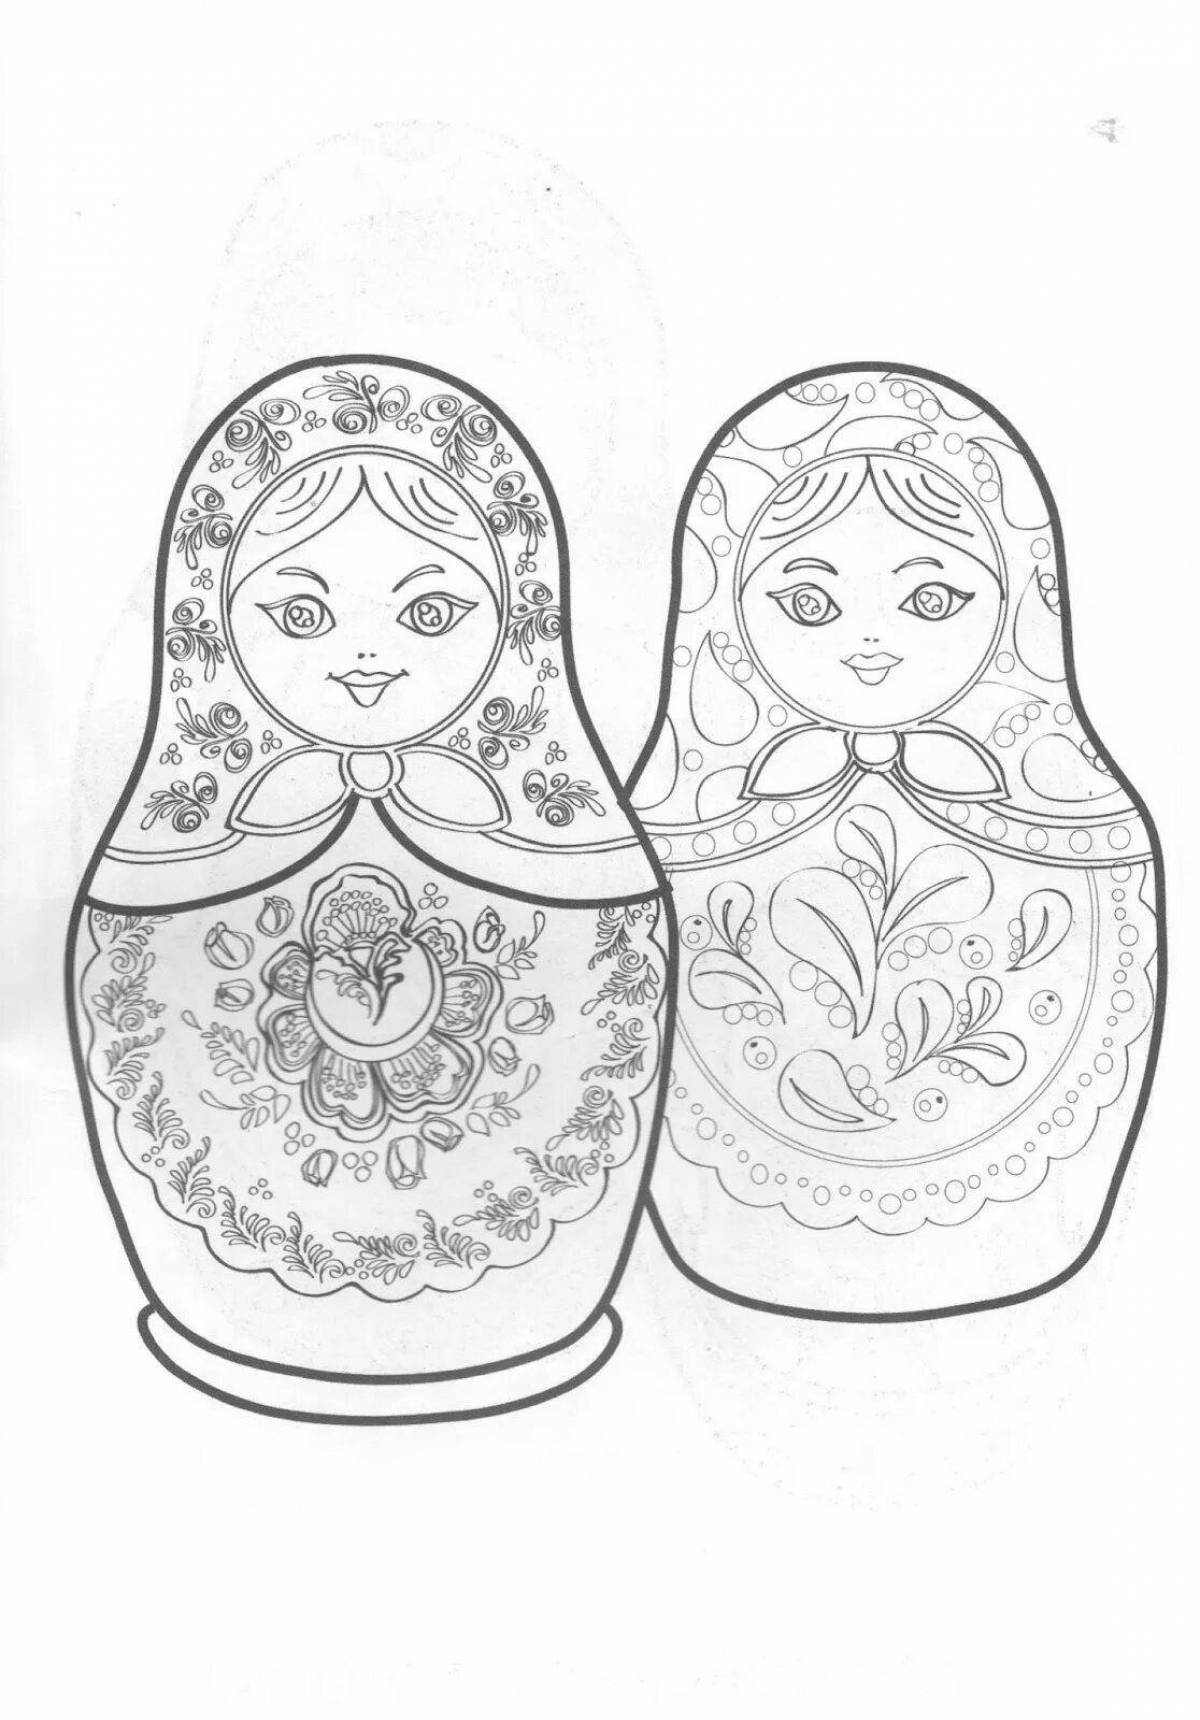 Coloring book colorful Russian folk crafts